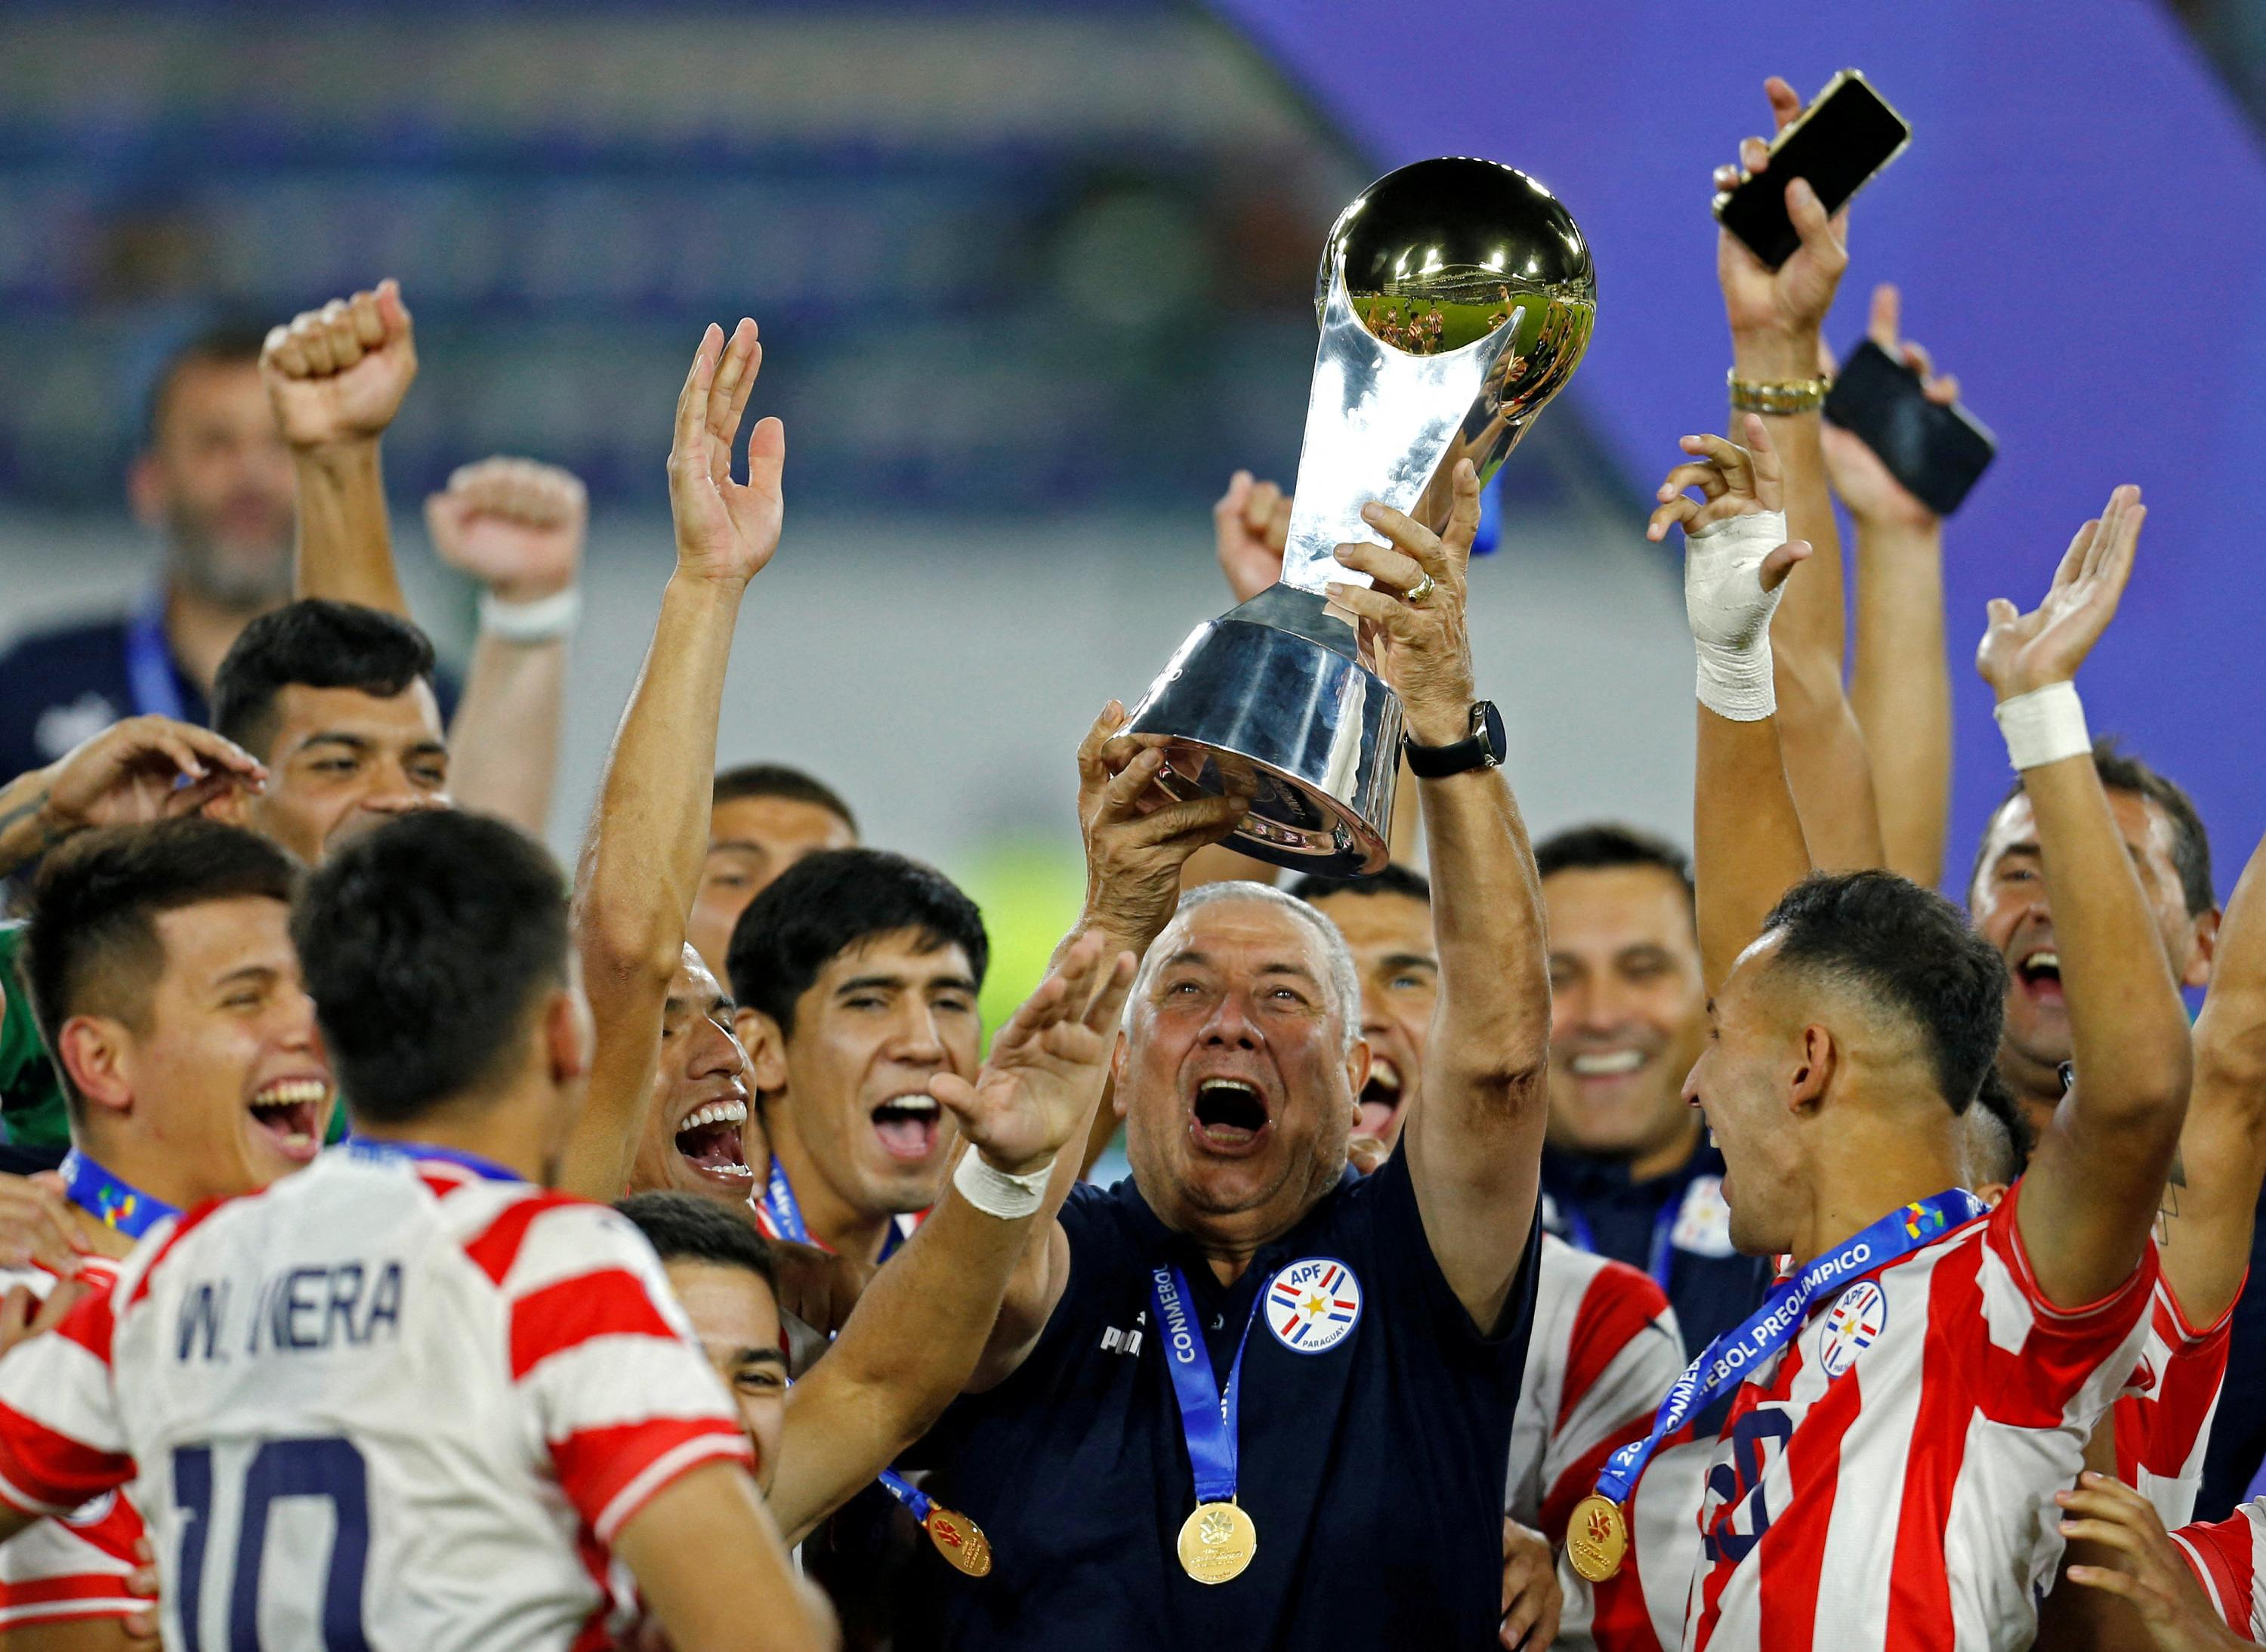 Paris 2024 Olympic Games: Paraguay wins the football qualifying tournament ahead of Brazil and Argentina